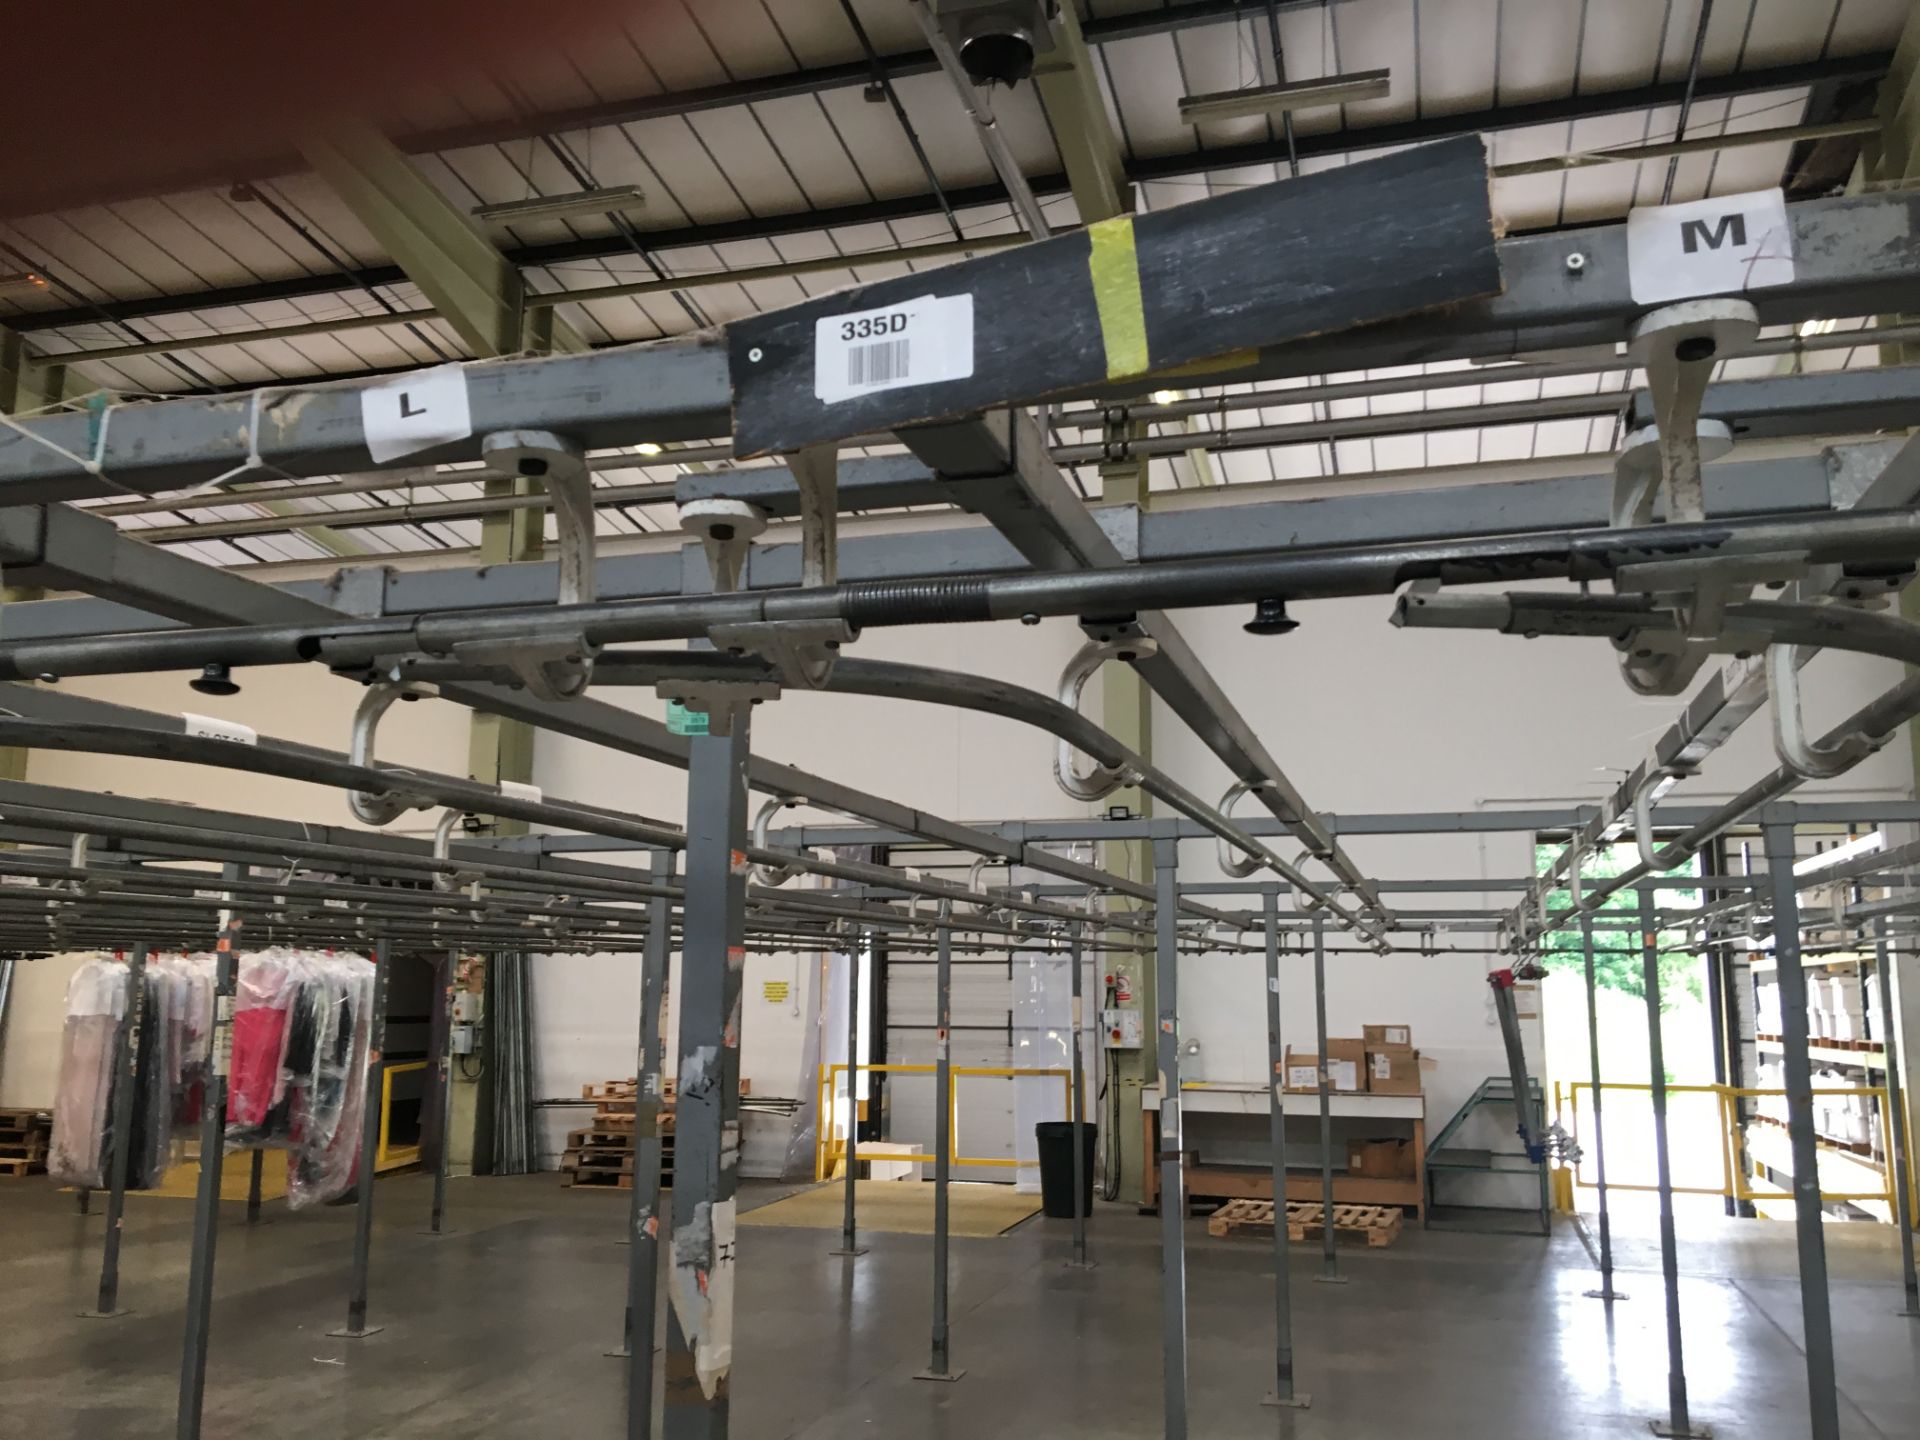 Overhead Garment Handling Conveyor System (thoughout premises) - Image 16 of 21